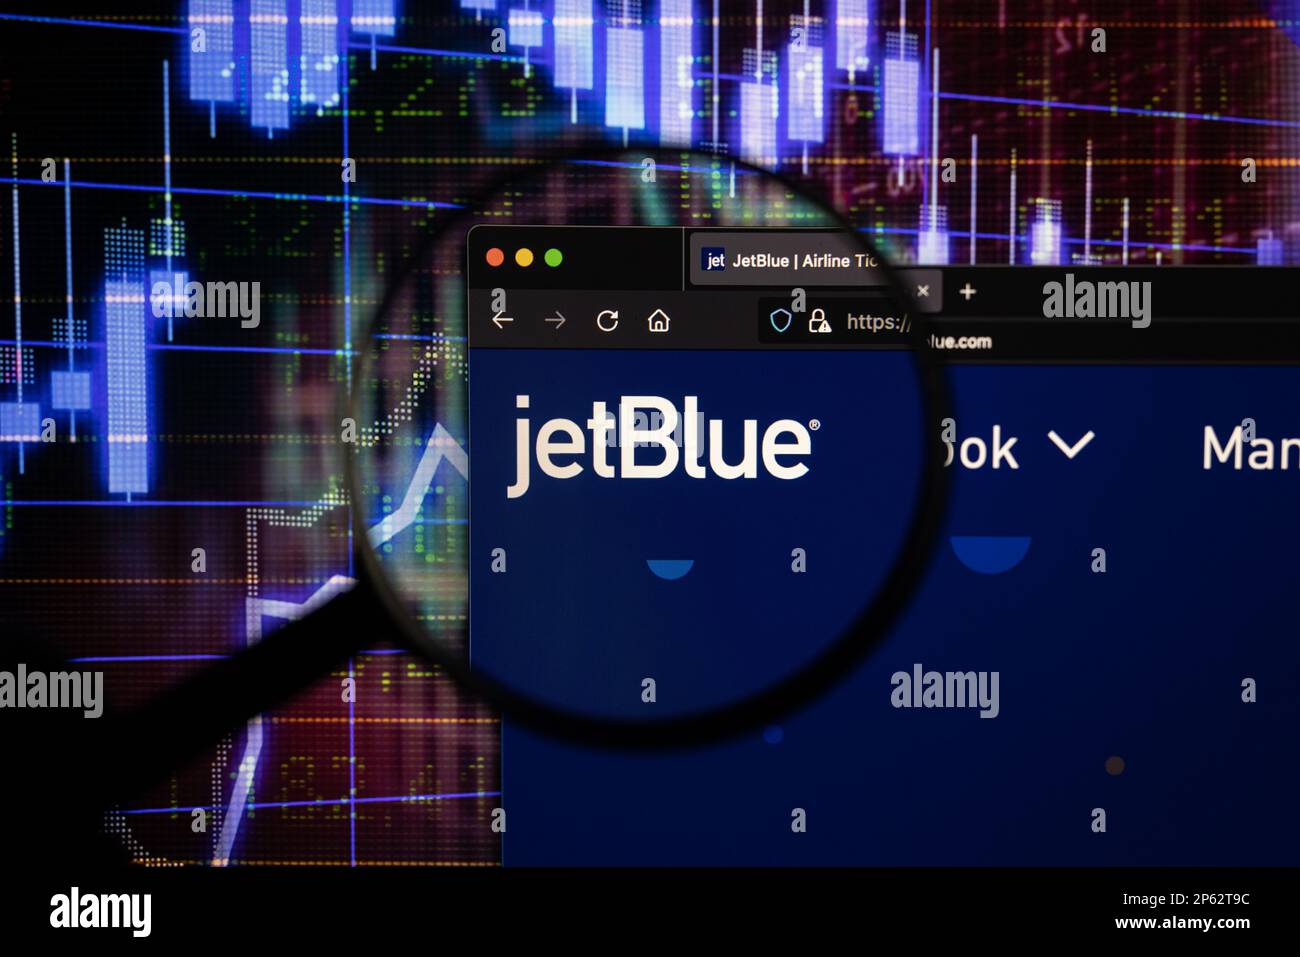 jetBlue airline company logo on a website with blurry stock market developments in the background, seen on a screen through a magnifying glass Stock Photo